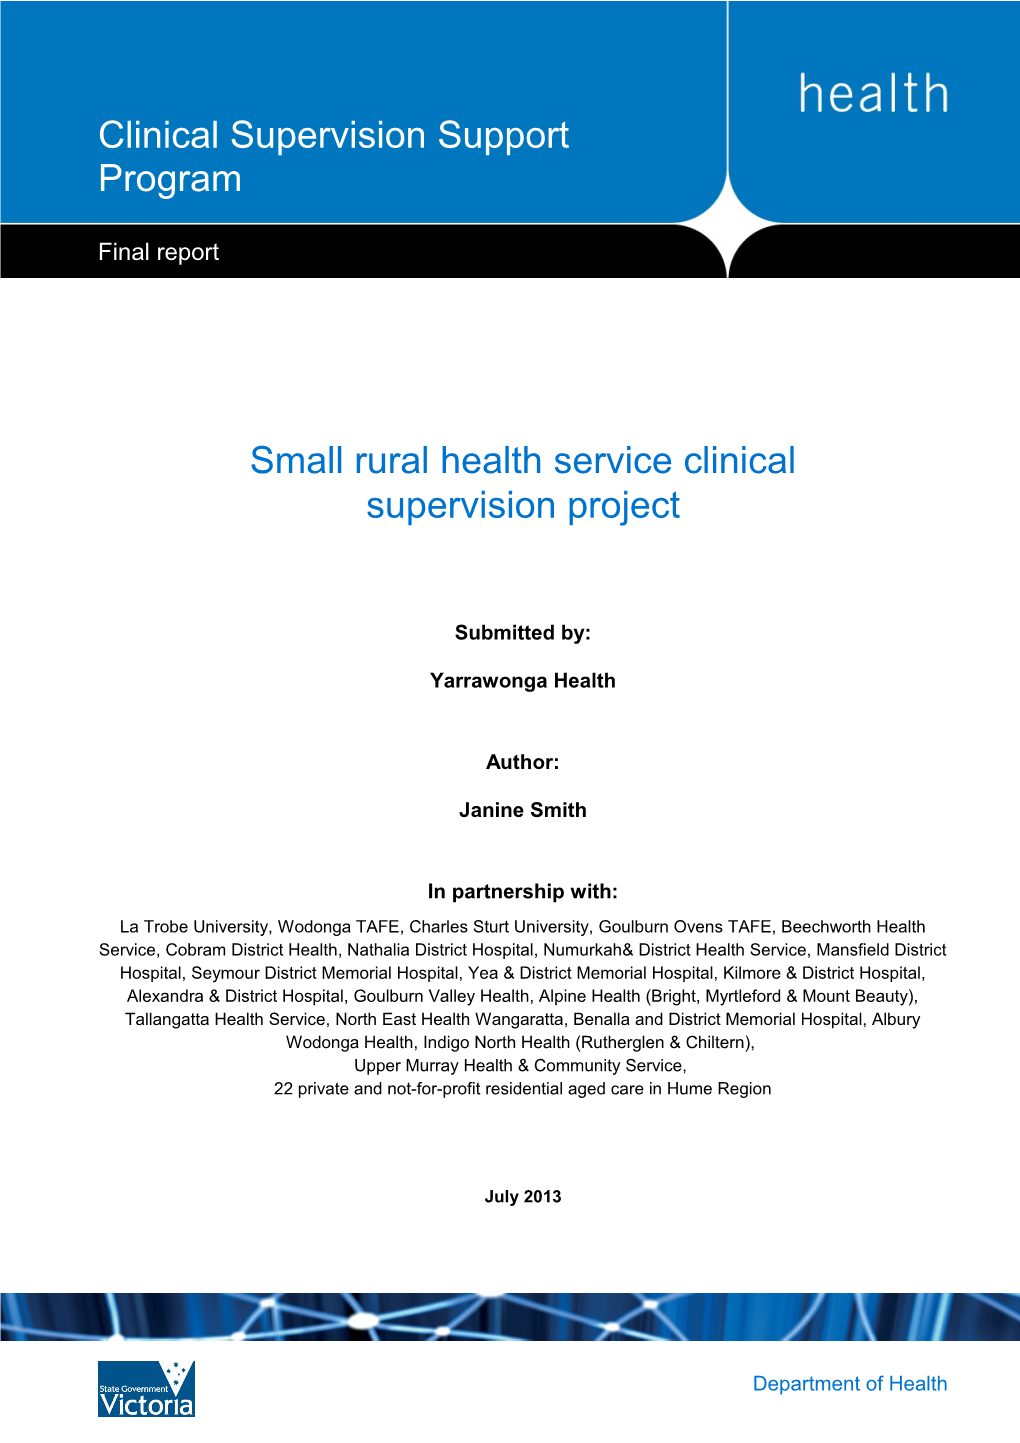 Small Rural Health Service Clinical Supervision Project